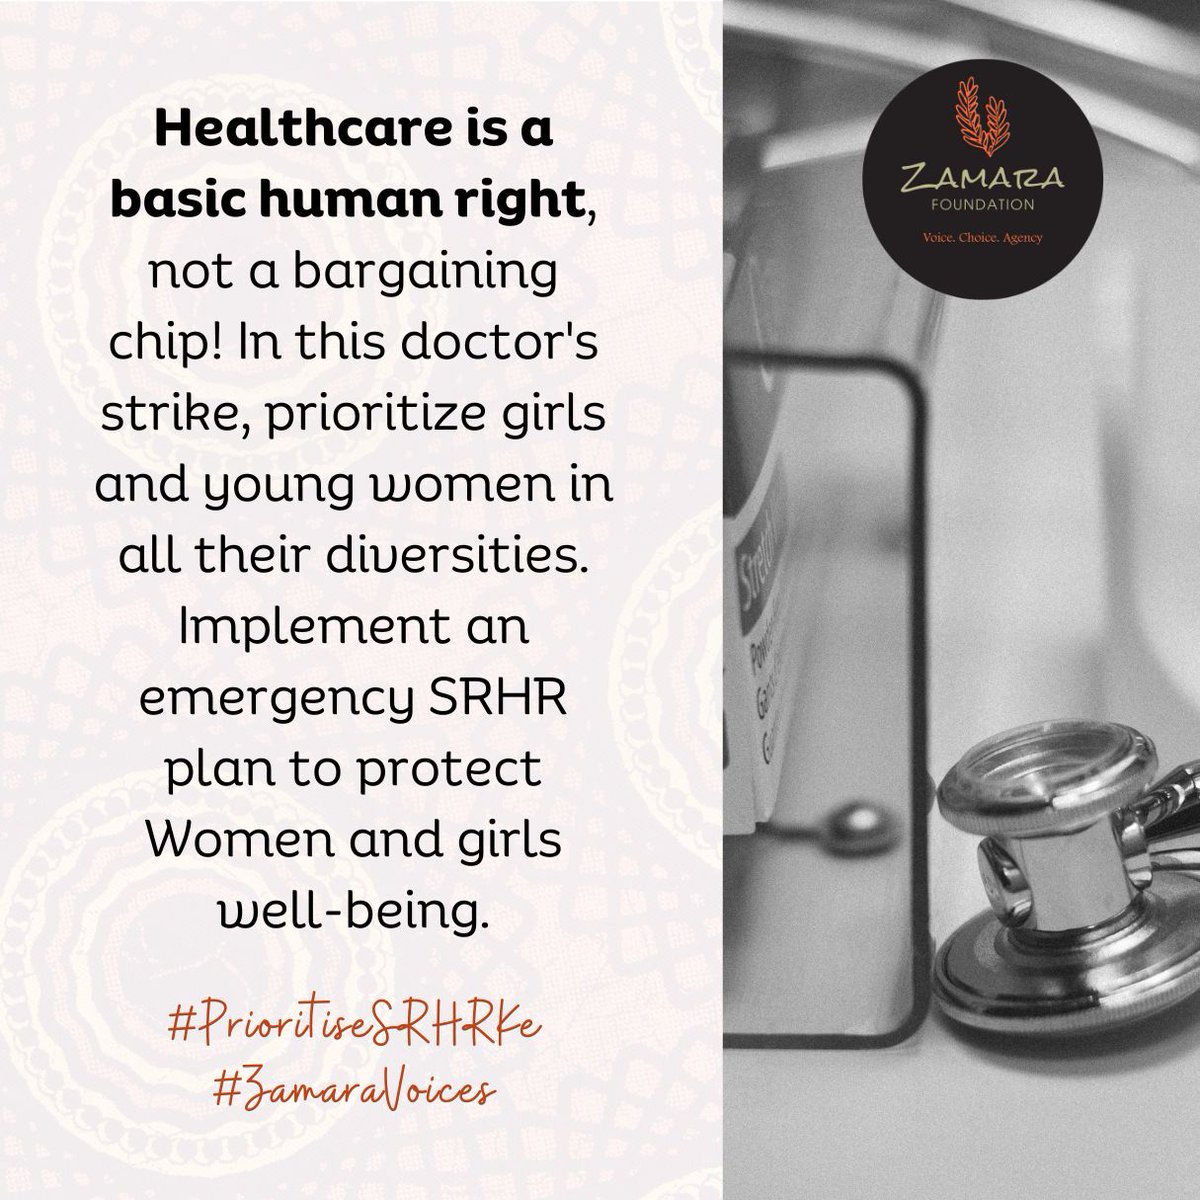 @Zamara_fdn @NancyBaraza2 @_Itaeli @KombeMartha @QueerSpacKe @its_qario @ItsKyuleNgao @MenstrualDaddy @Shis1Shisia The stress and anxiety caused by uncertainty in accessing essential healthcare services can have profound effects on women's mental health. #PrioritiseSRHRKe #ZamaraVoices @Zamara_fdn